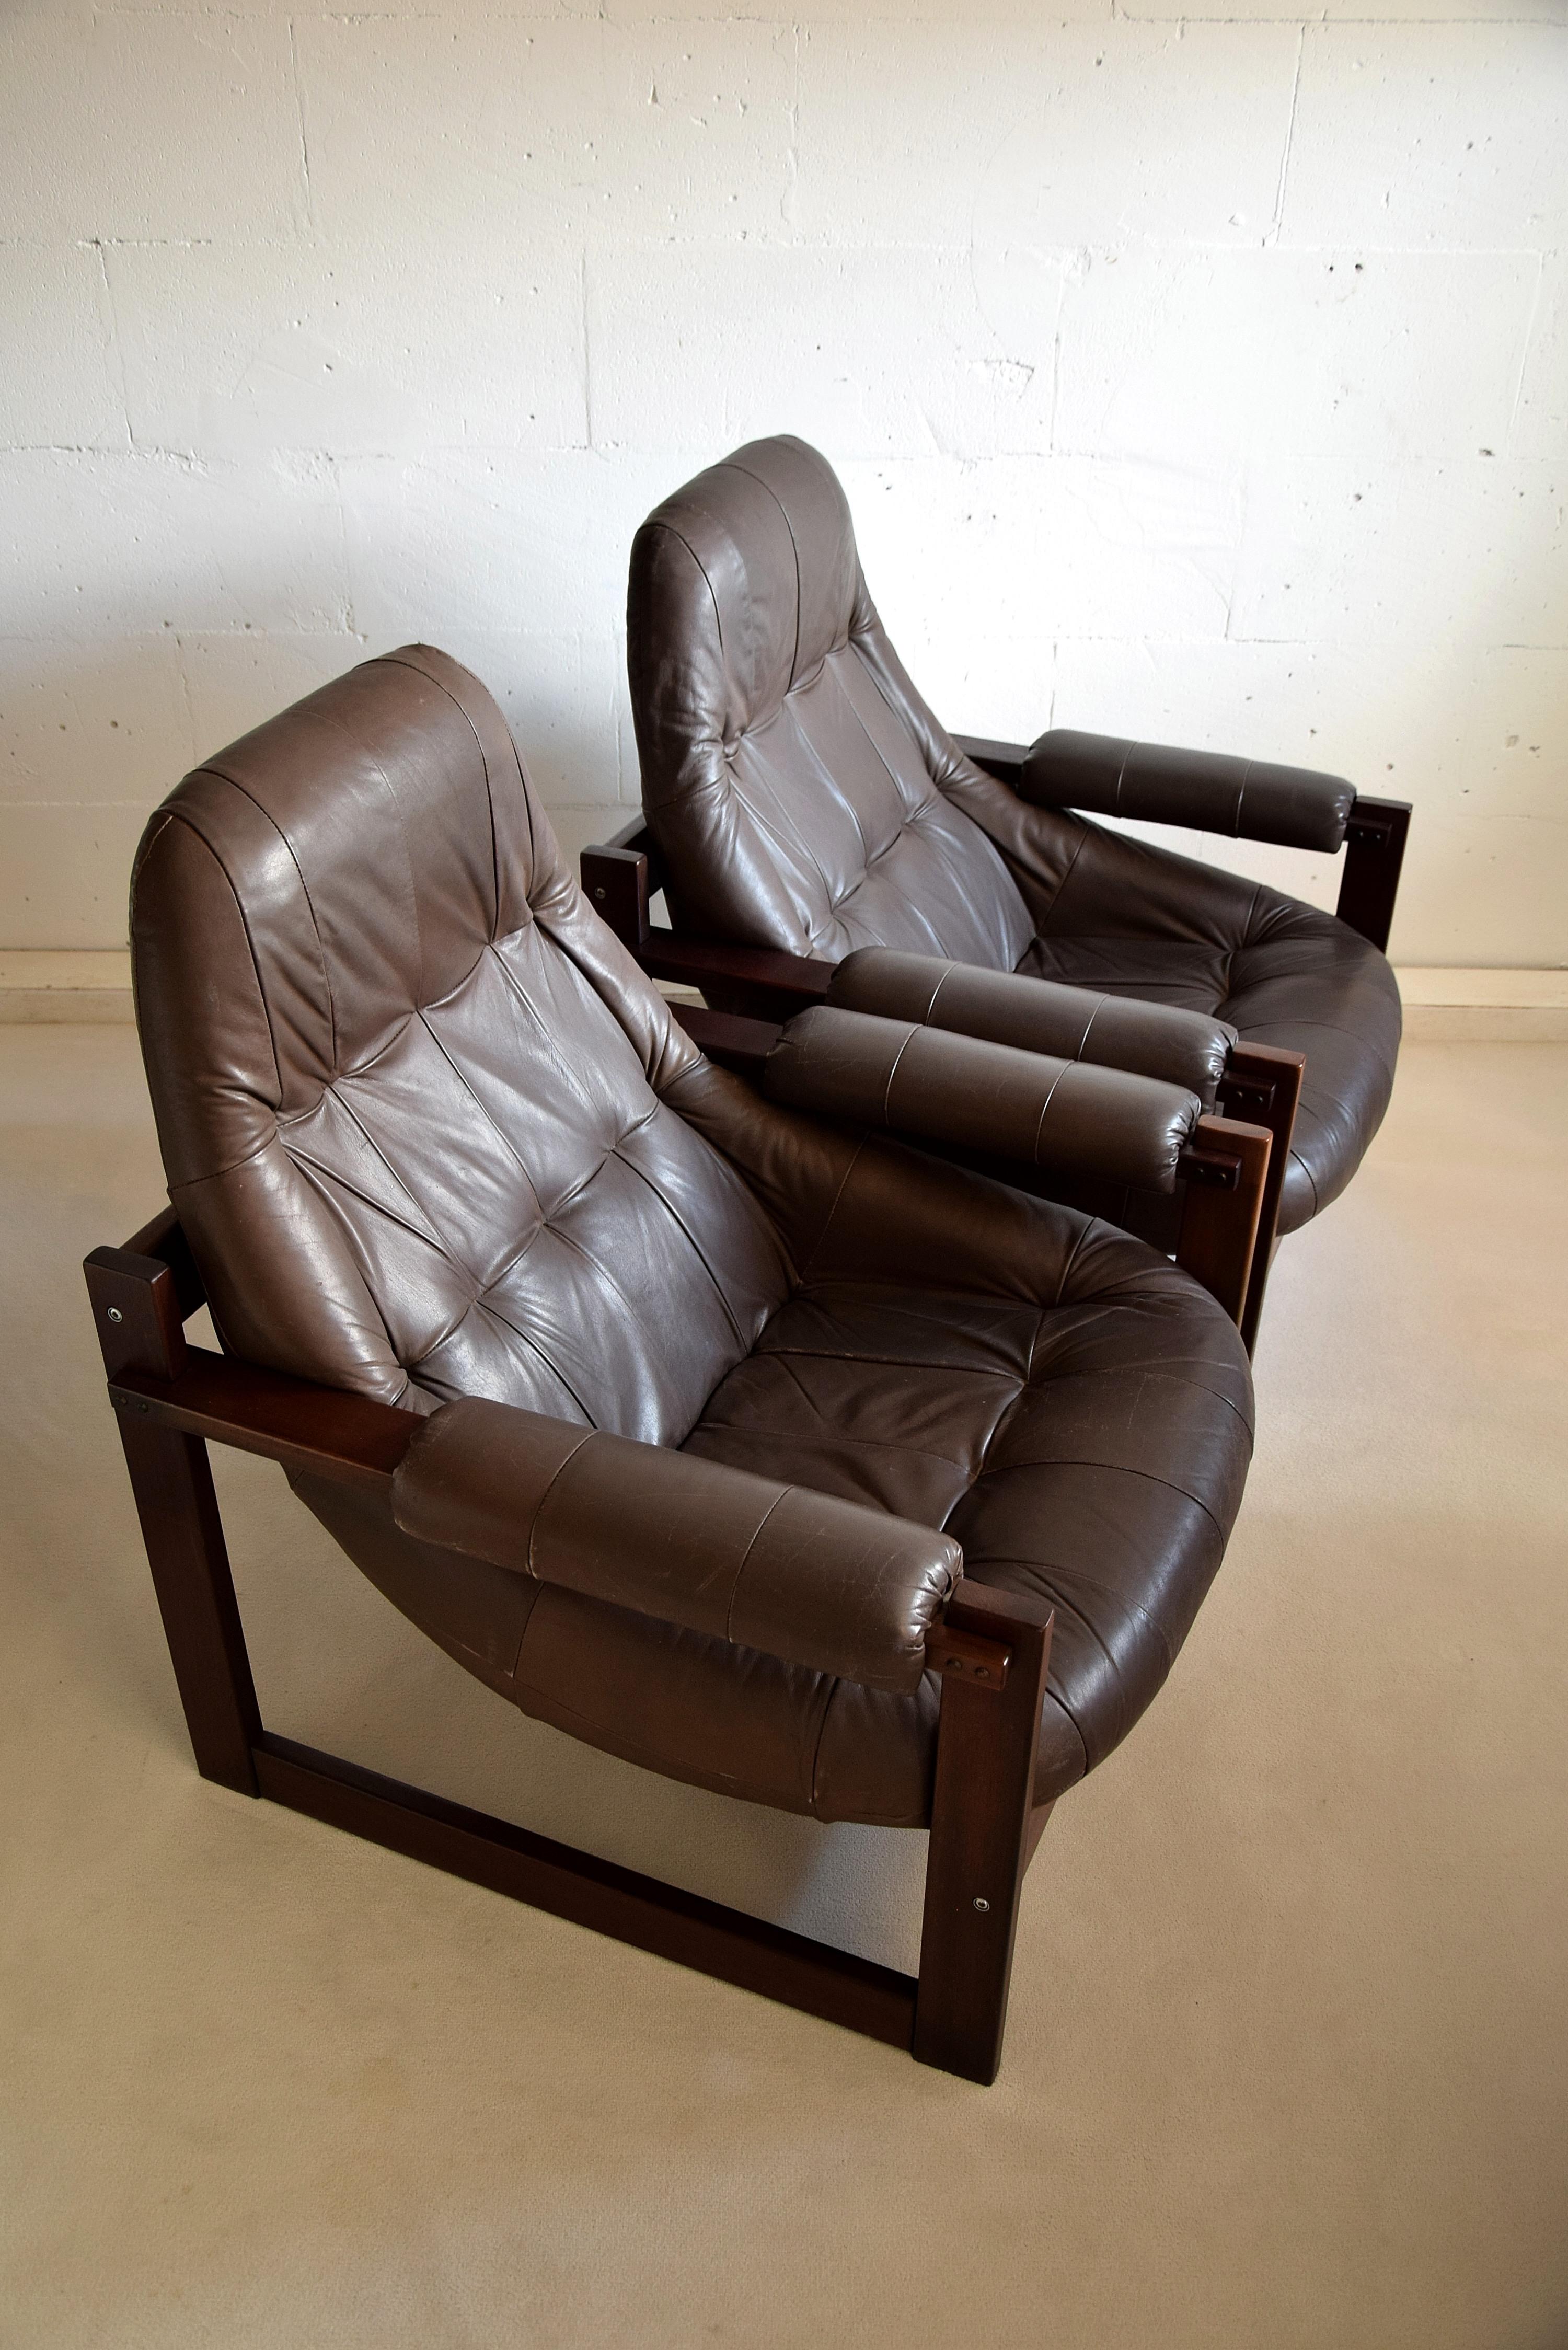 Looking for a stylish addition to your home or office? Check out these exquisite mid-century modern lounge chairs by Percival Lafer, crafted with care in São Paolo, Brazil. The chairs feature a beautiful combination of taupe-colored leather and